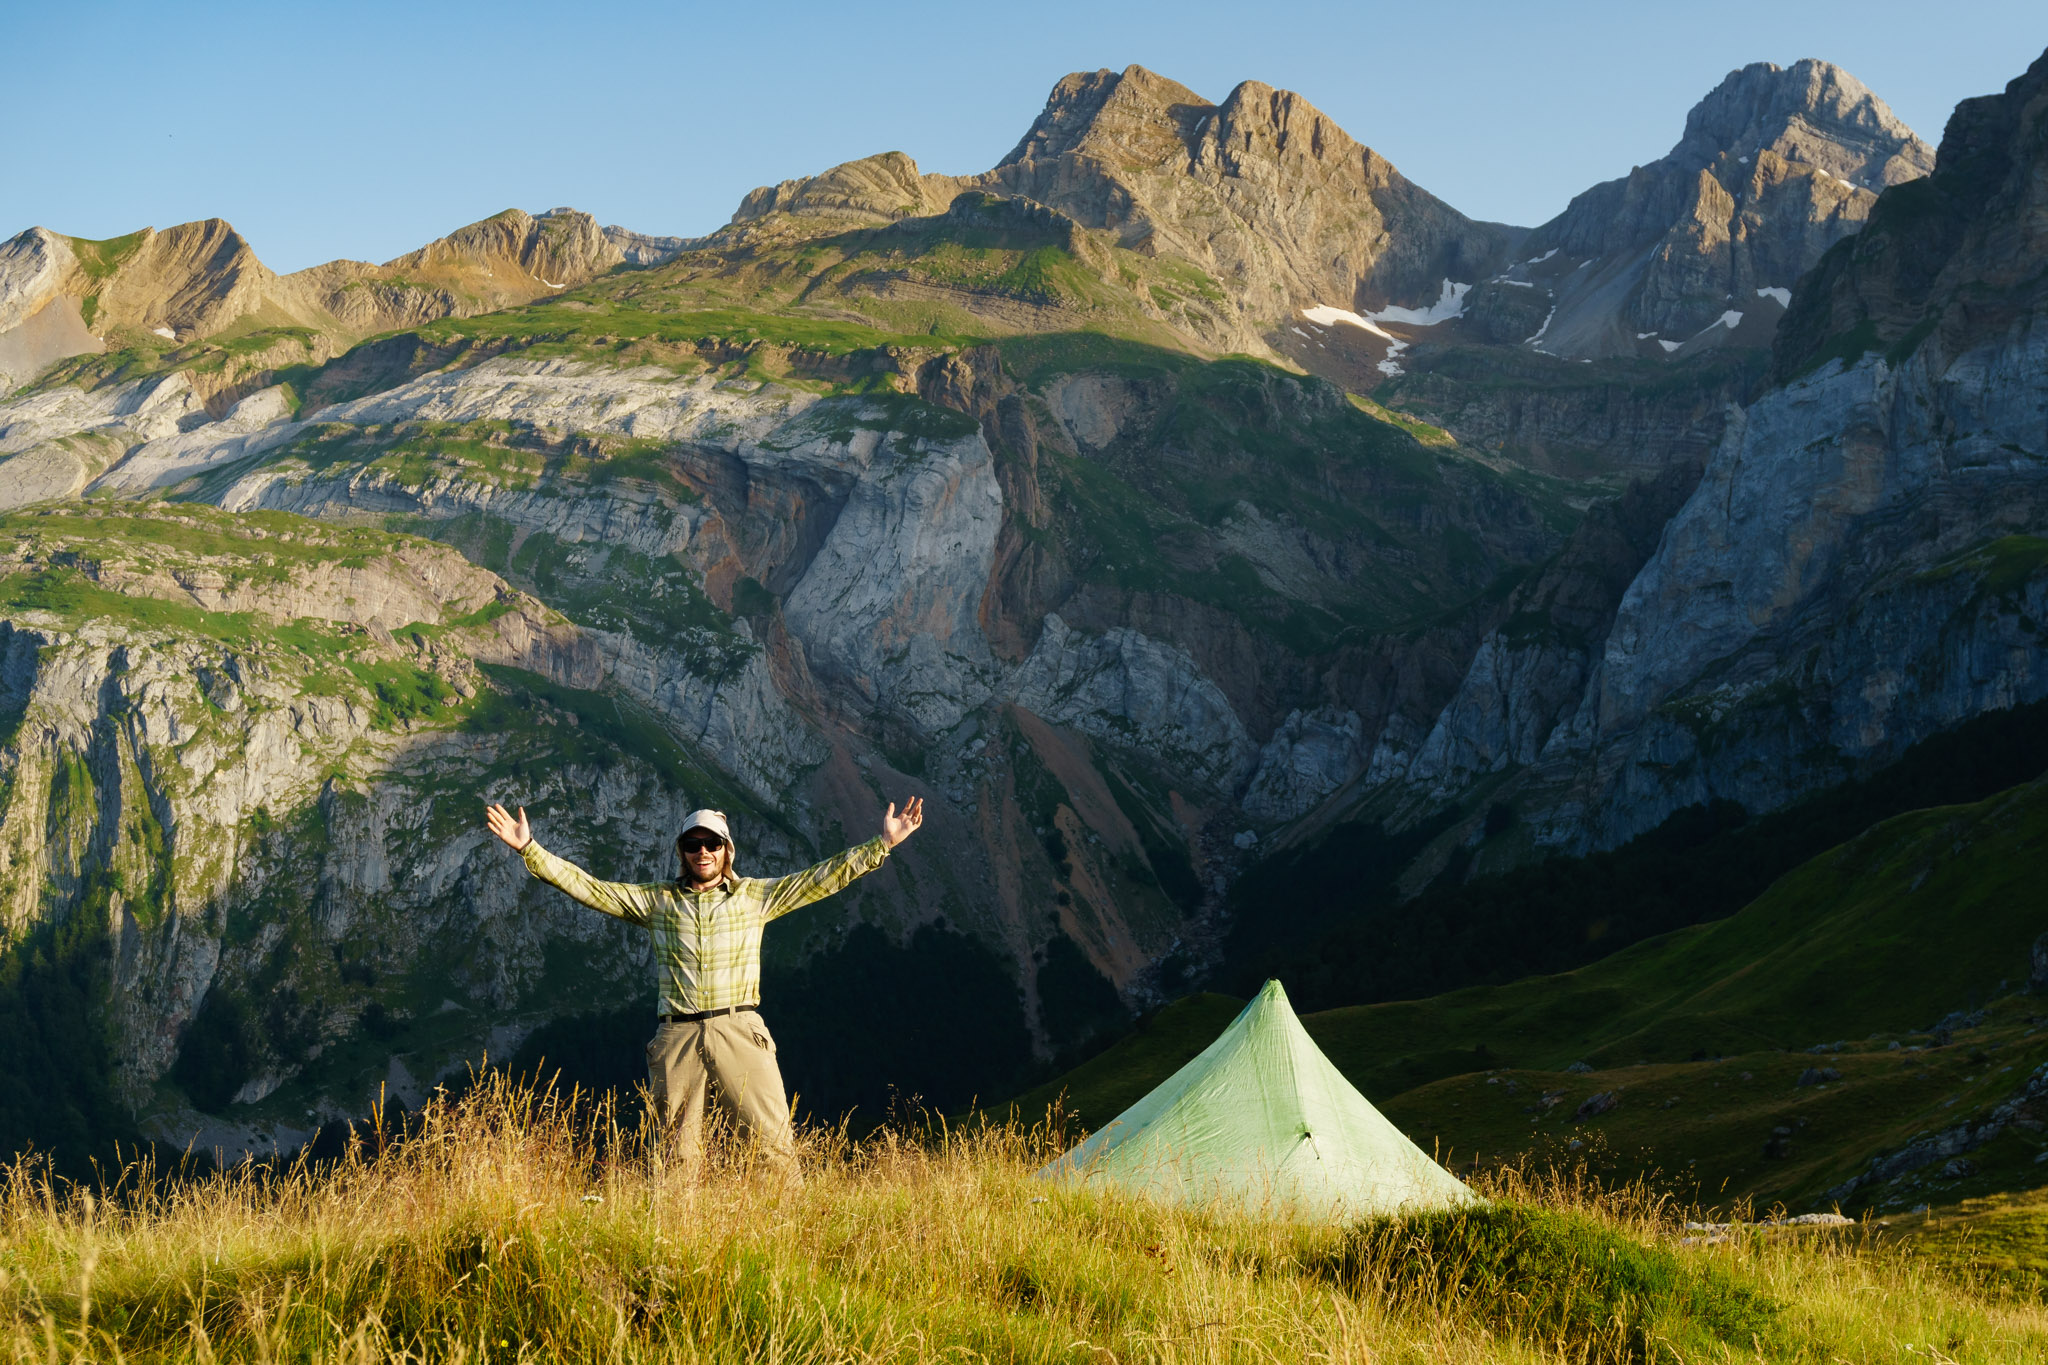 Alex Roddie on a Mountain with tent